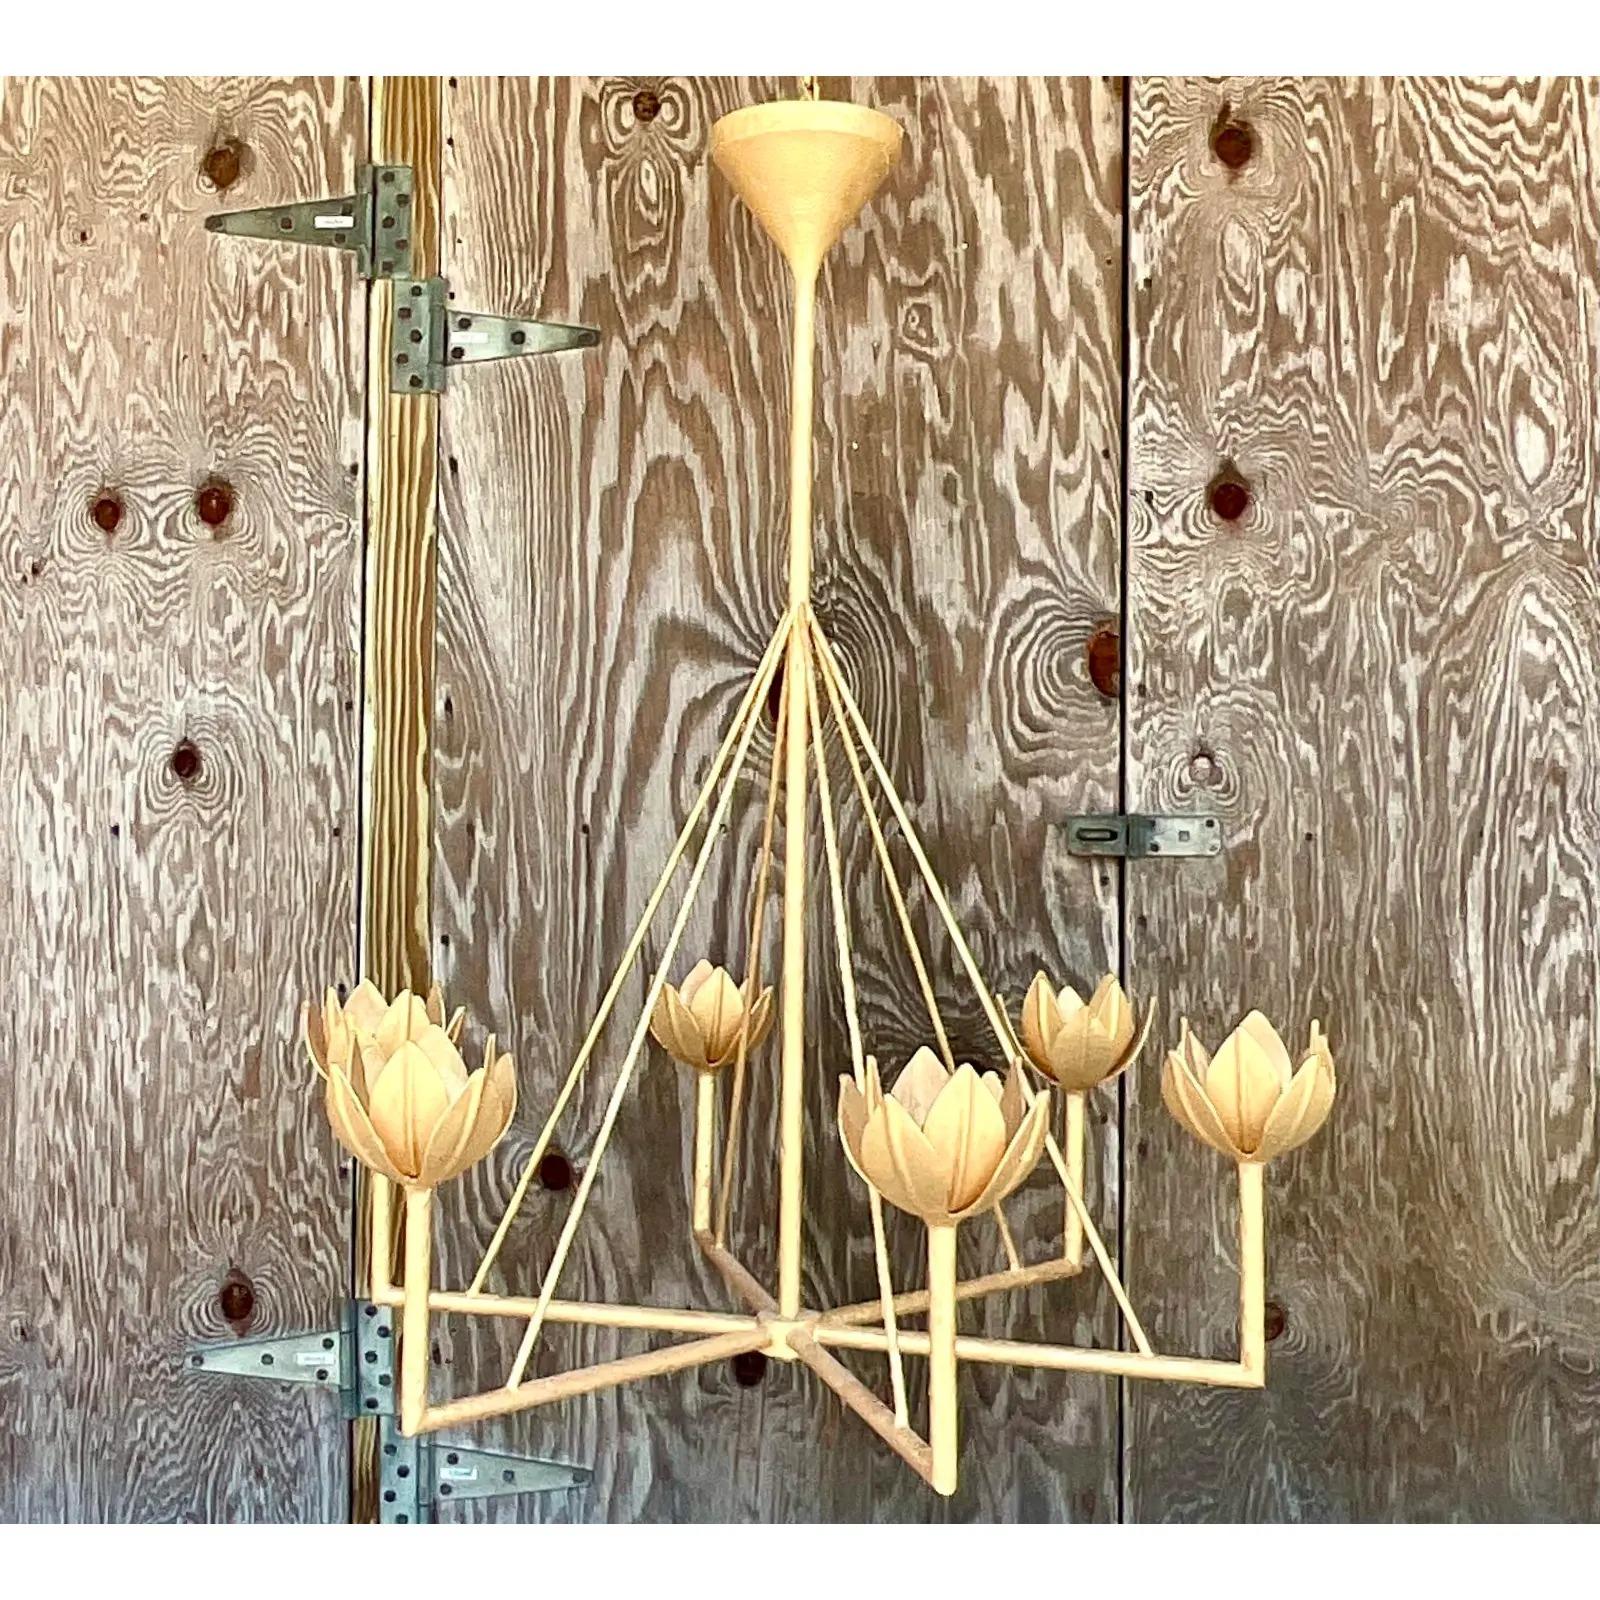 Fantastic vintage Contemporary six arm chandelier. Beautiful Julie Neill design with a lotus flower arm and antiqued gold finish. A striking look. Acquired from a Palm Beach estate.

Up to 120V (US Standard)Hardwired

The chandelier is in great